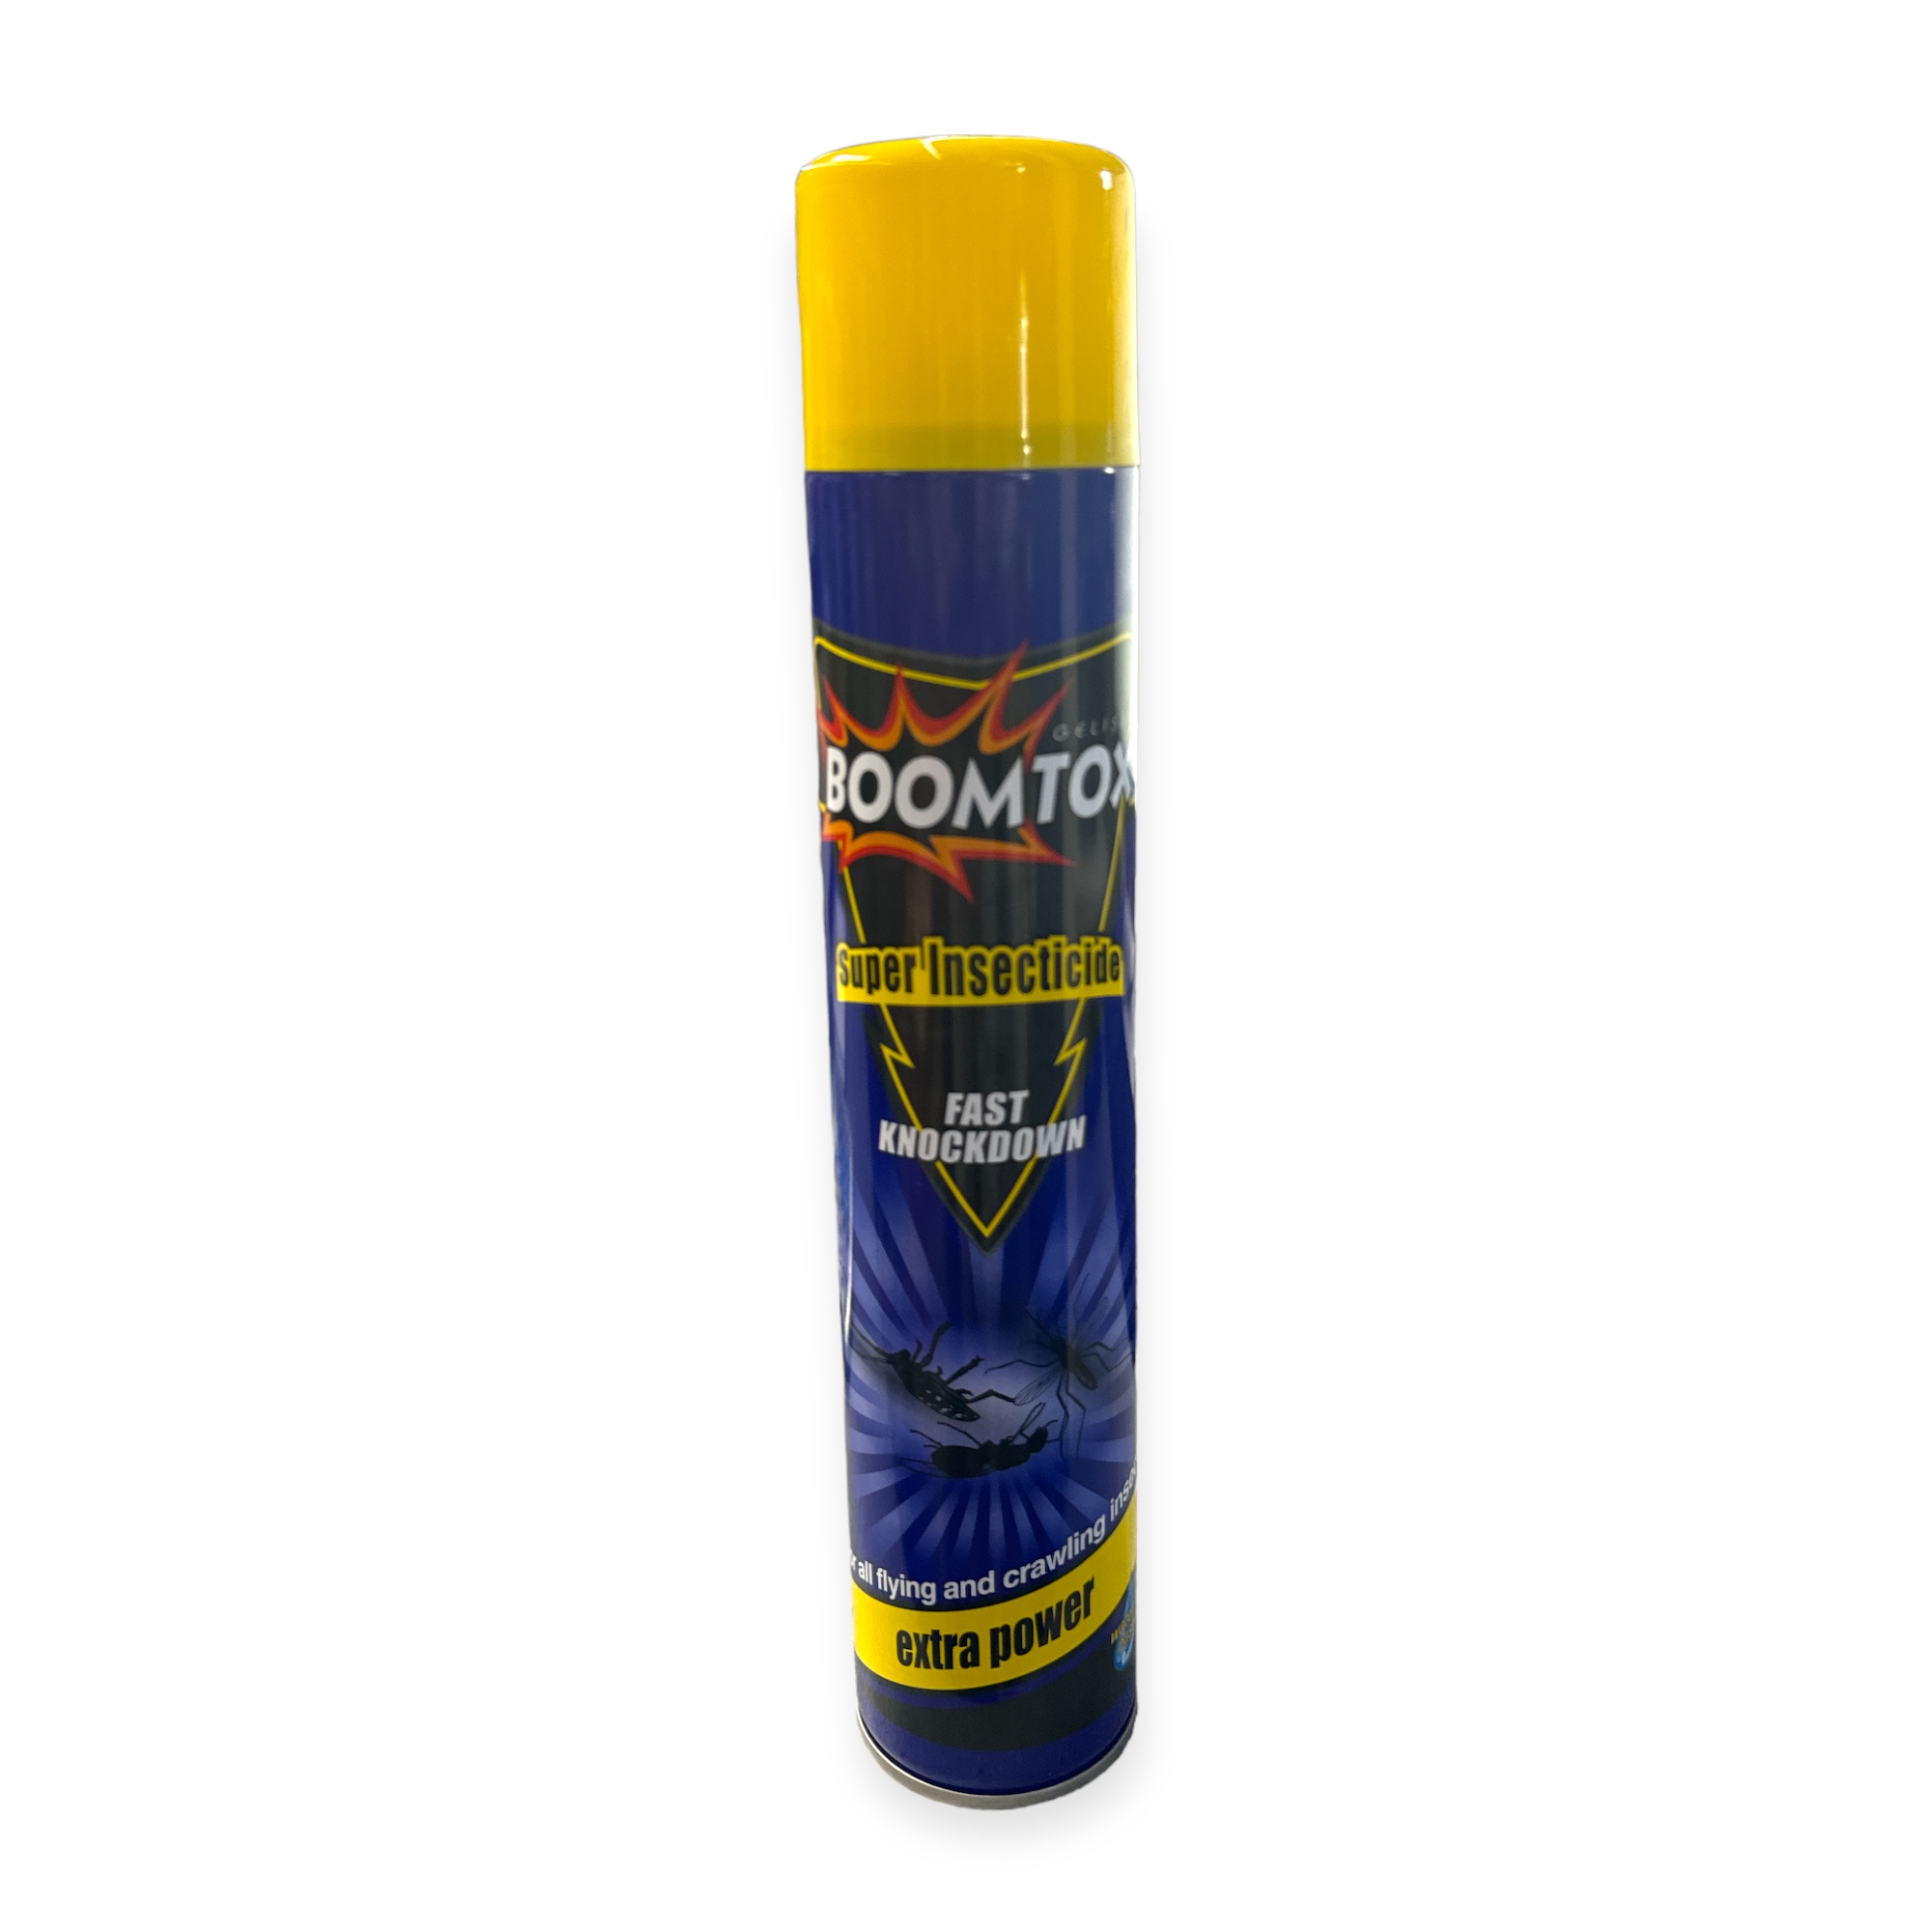 Insecticid BOOMTOX 400ml, engross